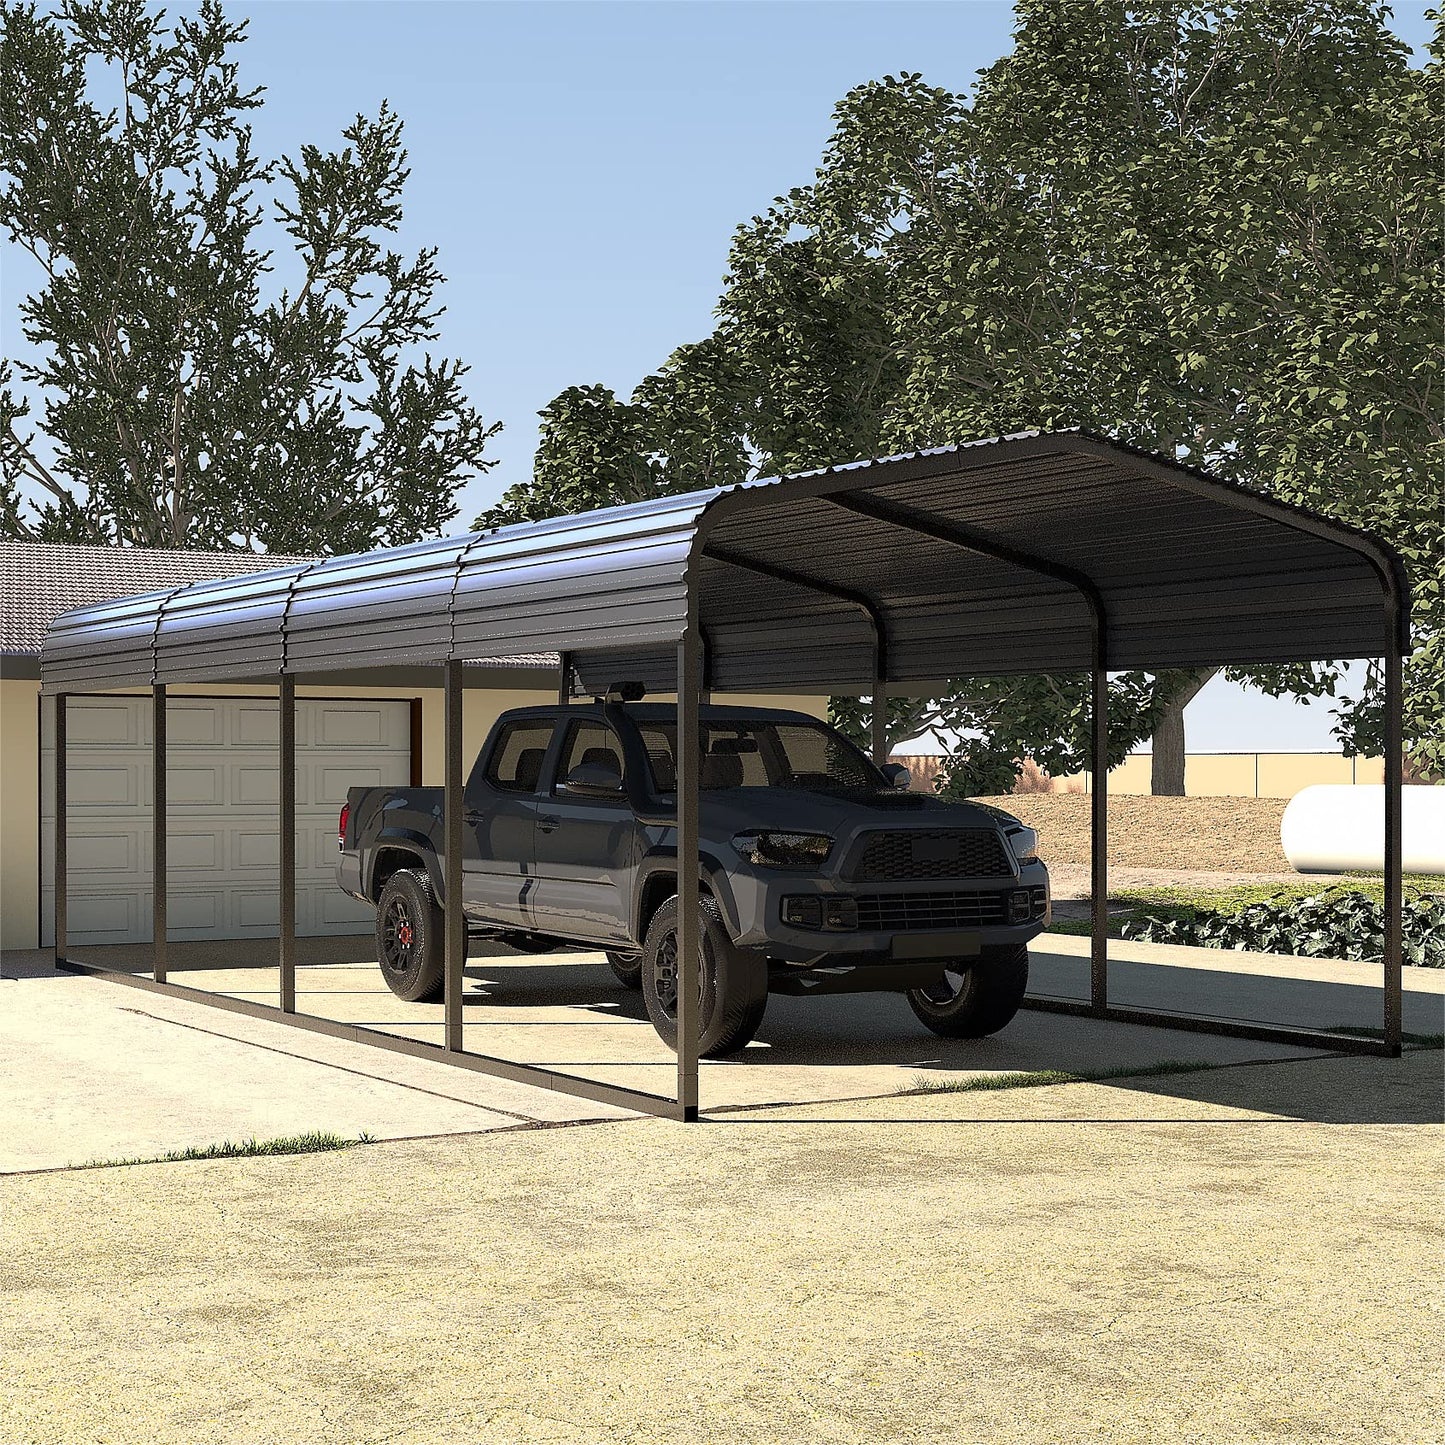 MUPATER 12' x 20' Carport, Outdoor Metal Carport Tent, Heavy Duty Garage Car Shelter Shade with Metal Roof, Frame and Bolts for Car and Boat, Grey